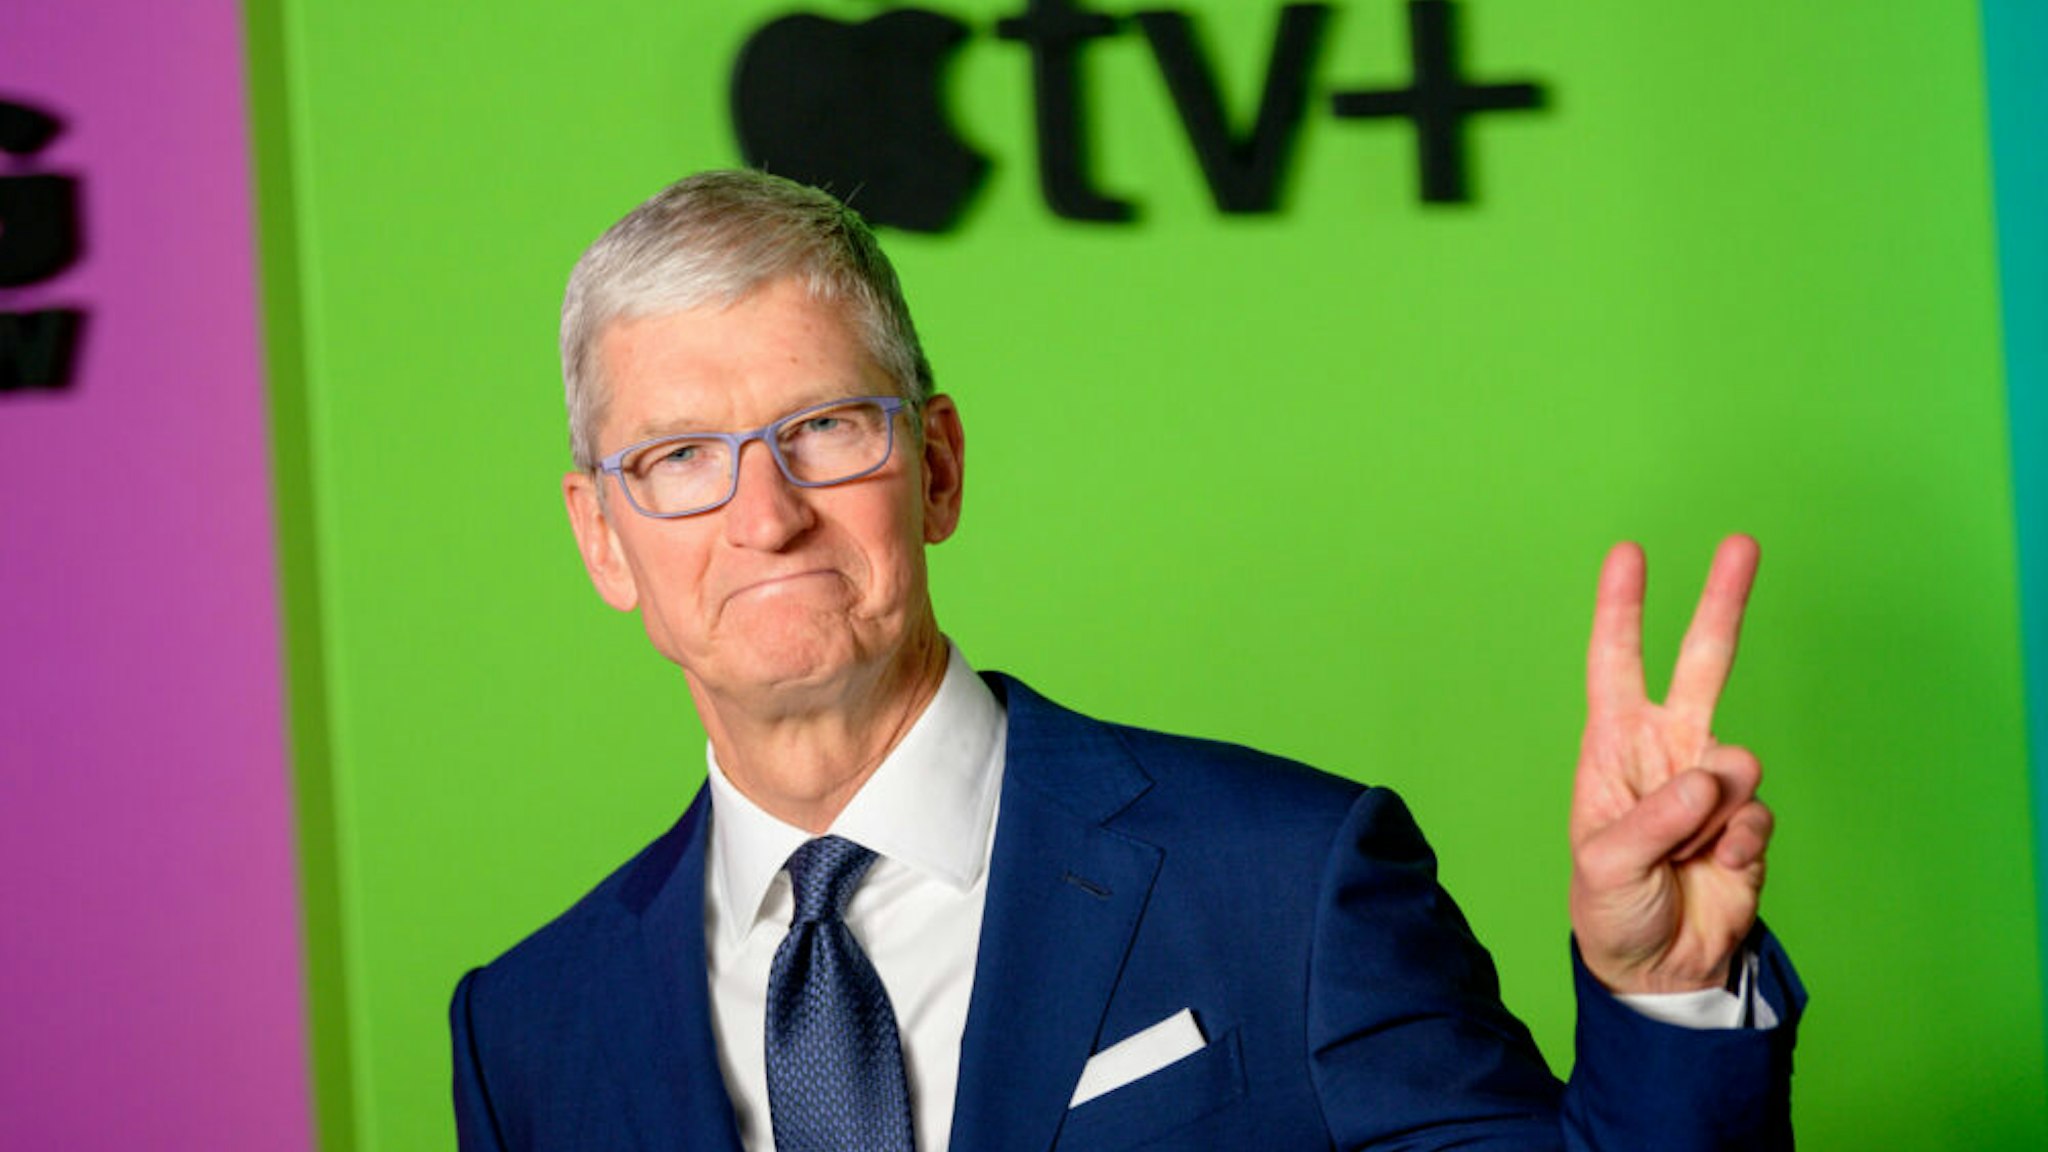 NEW YORK, NEW YORK - OCTOBER 28: Apple CEO Tim Cook attends Apple TV+'s "The Morning Show" world premiere at David Geffen Hall on October 28, 2019 in New York City.